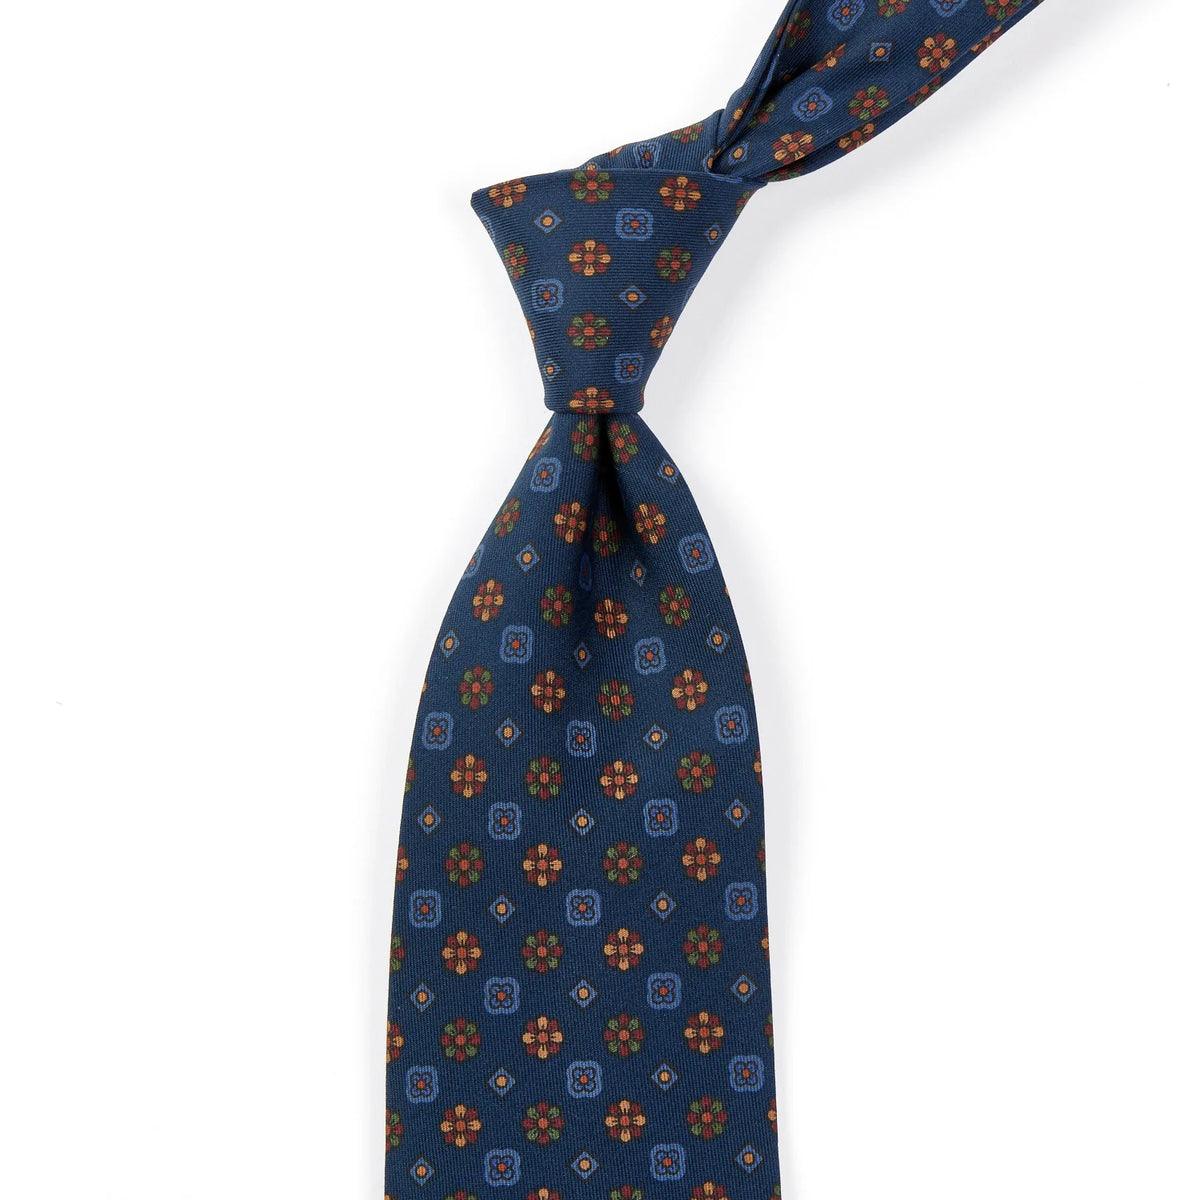 A Sovereign Grade Dark Navy Mixed Floret Ancient Madder Tie by KirbyAllison.com with blue and orange designs of the highest quality.